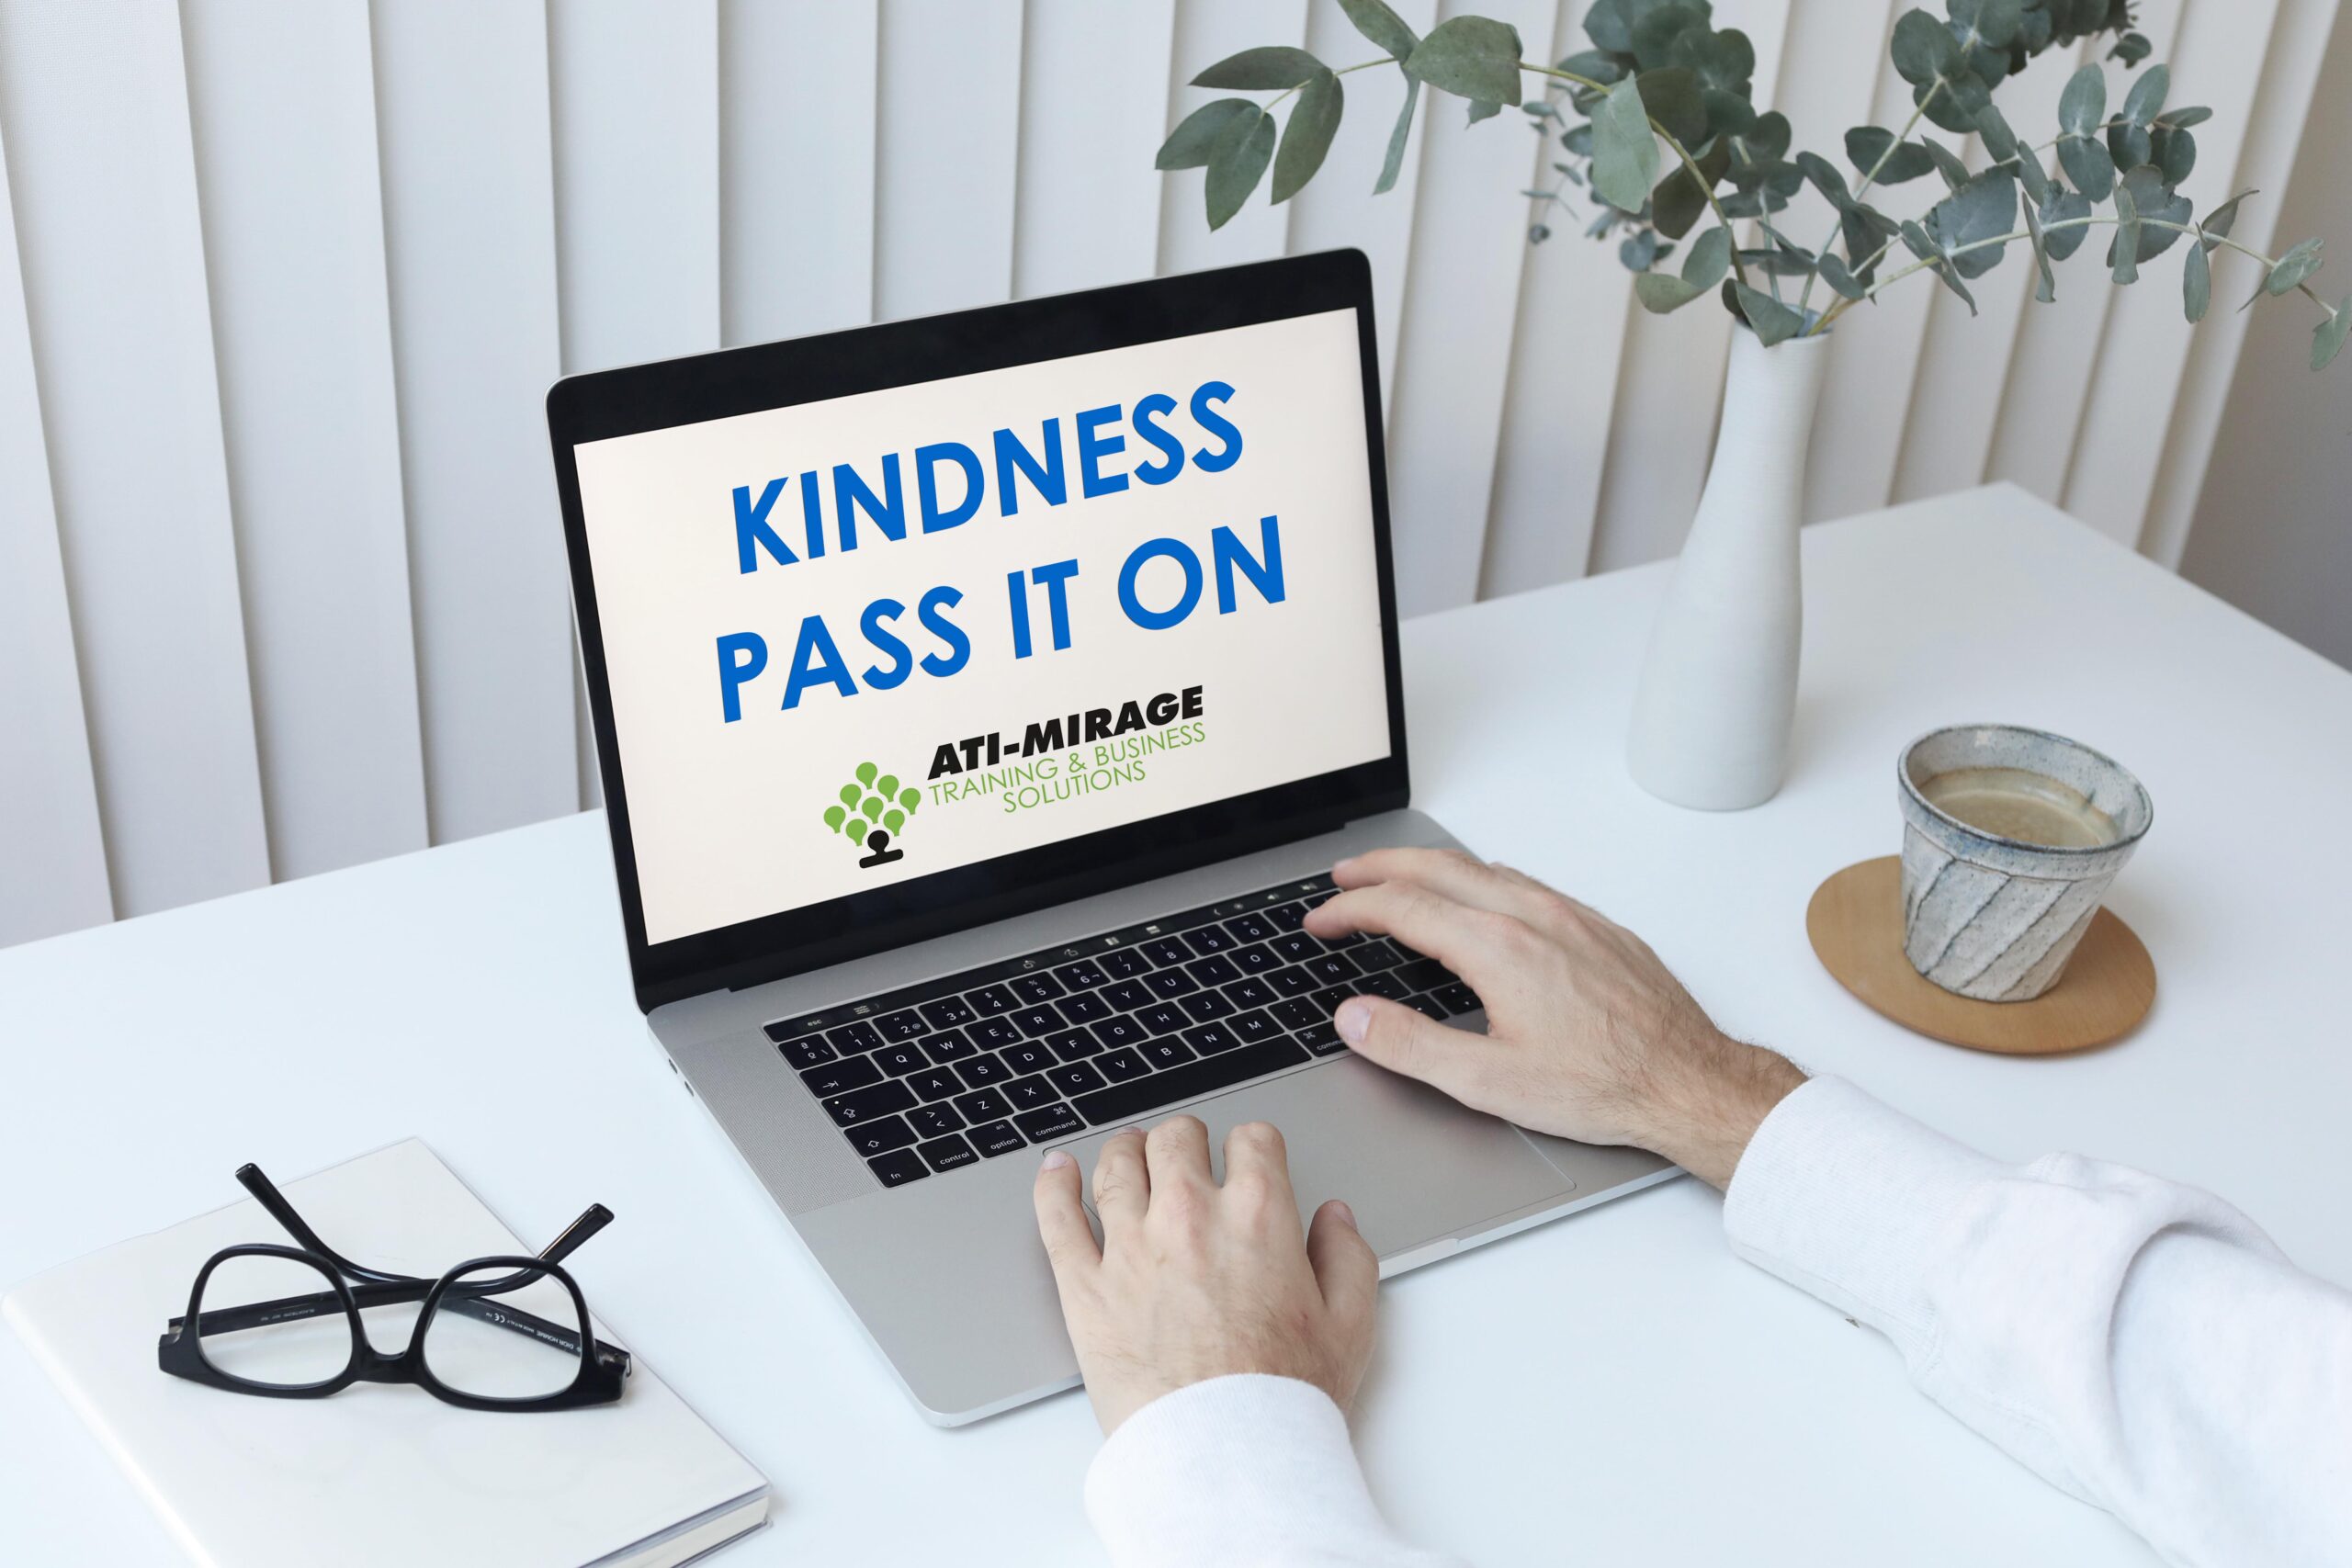 Kindness Pass It On message on the computer screen